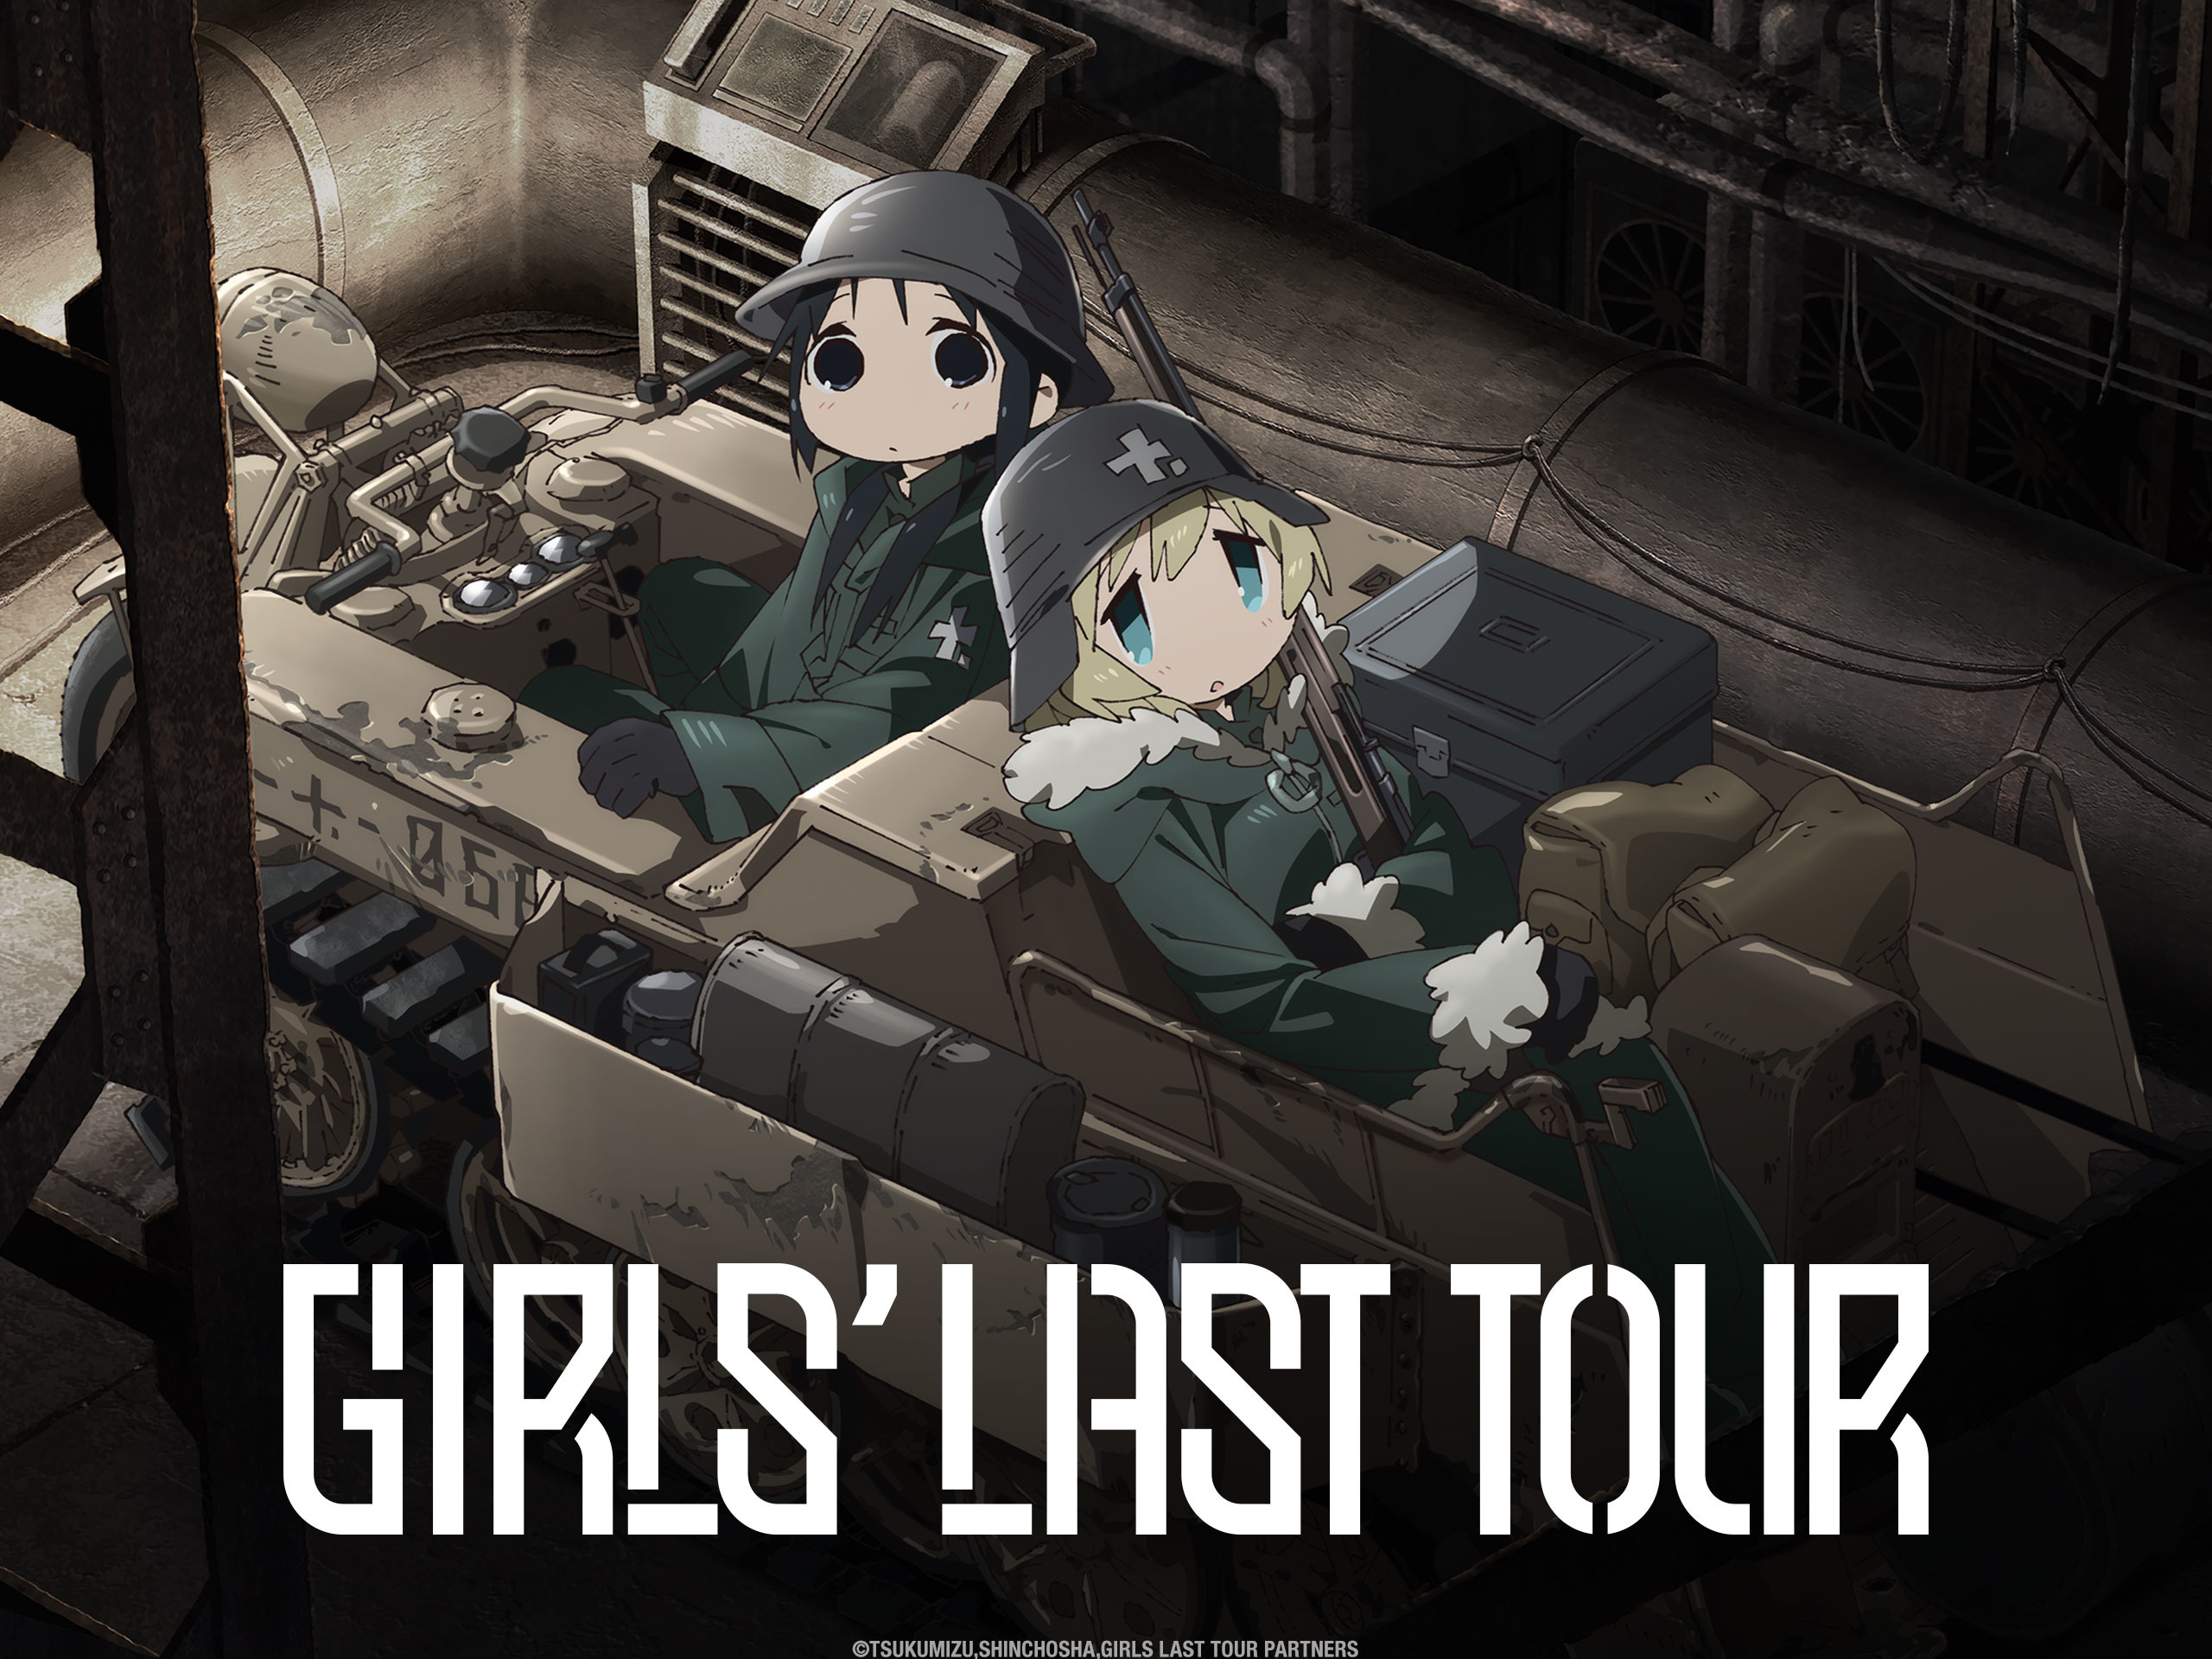 Review Anime Girls’ Last Tour